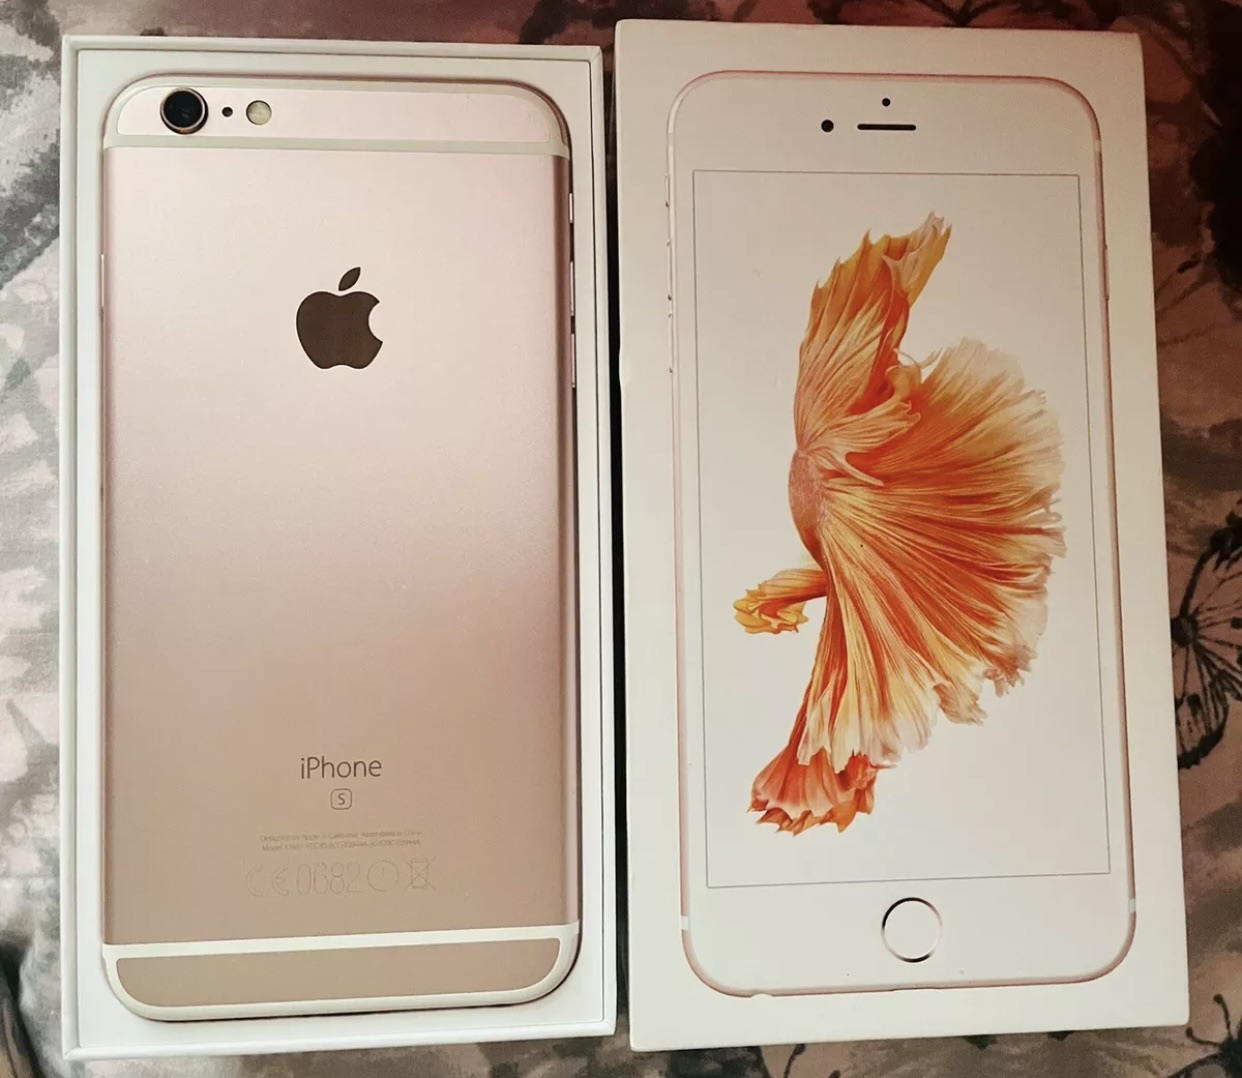 Iphone 6s Plus Original Sale Shop Iphone 6s Plus Original Sale With Great Discounts And Prices Online Lazada Philippines